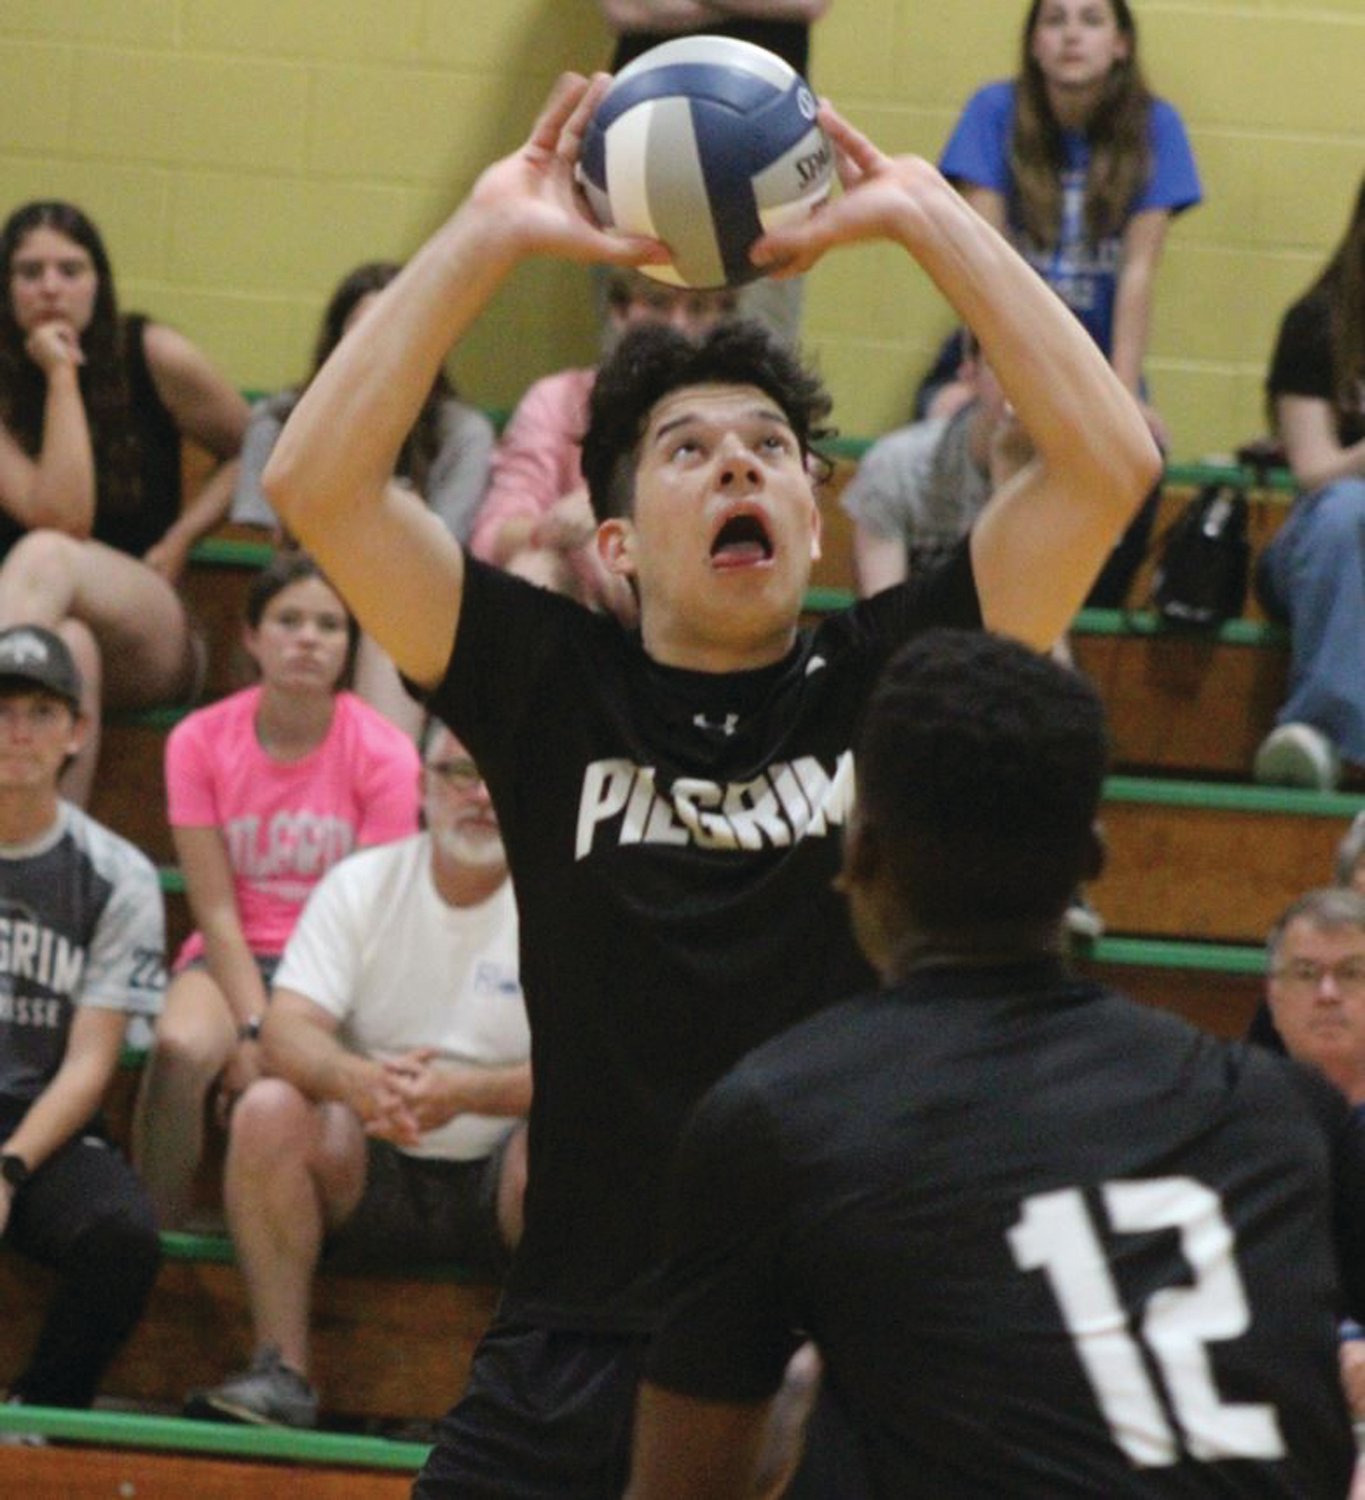 SETTING THE BALL: Azael Alvarez sets the ball at last week’s game against North Smithfield/Mount St. Charles.